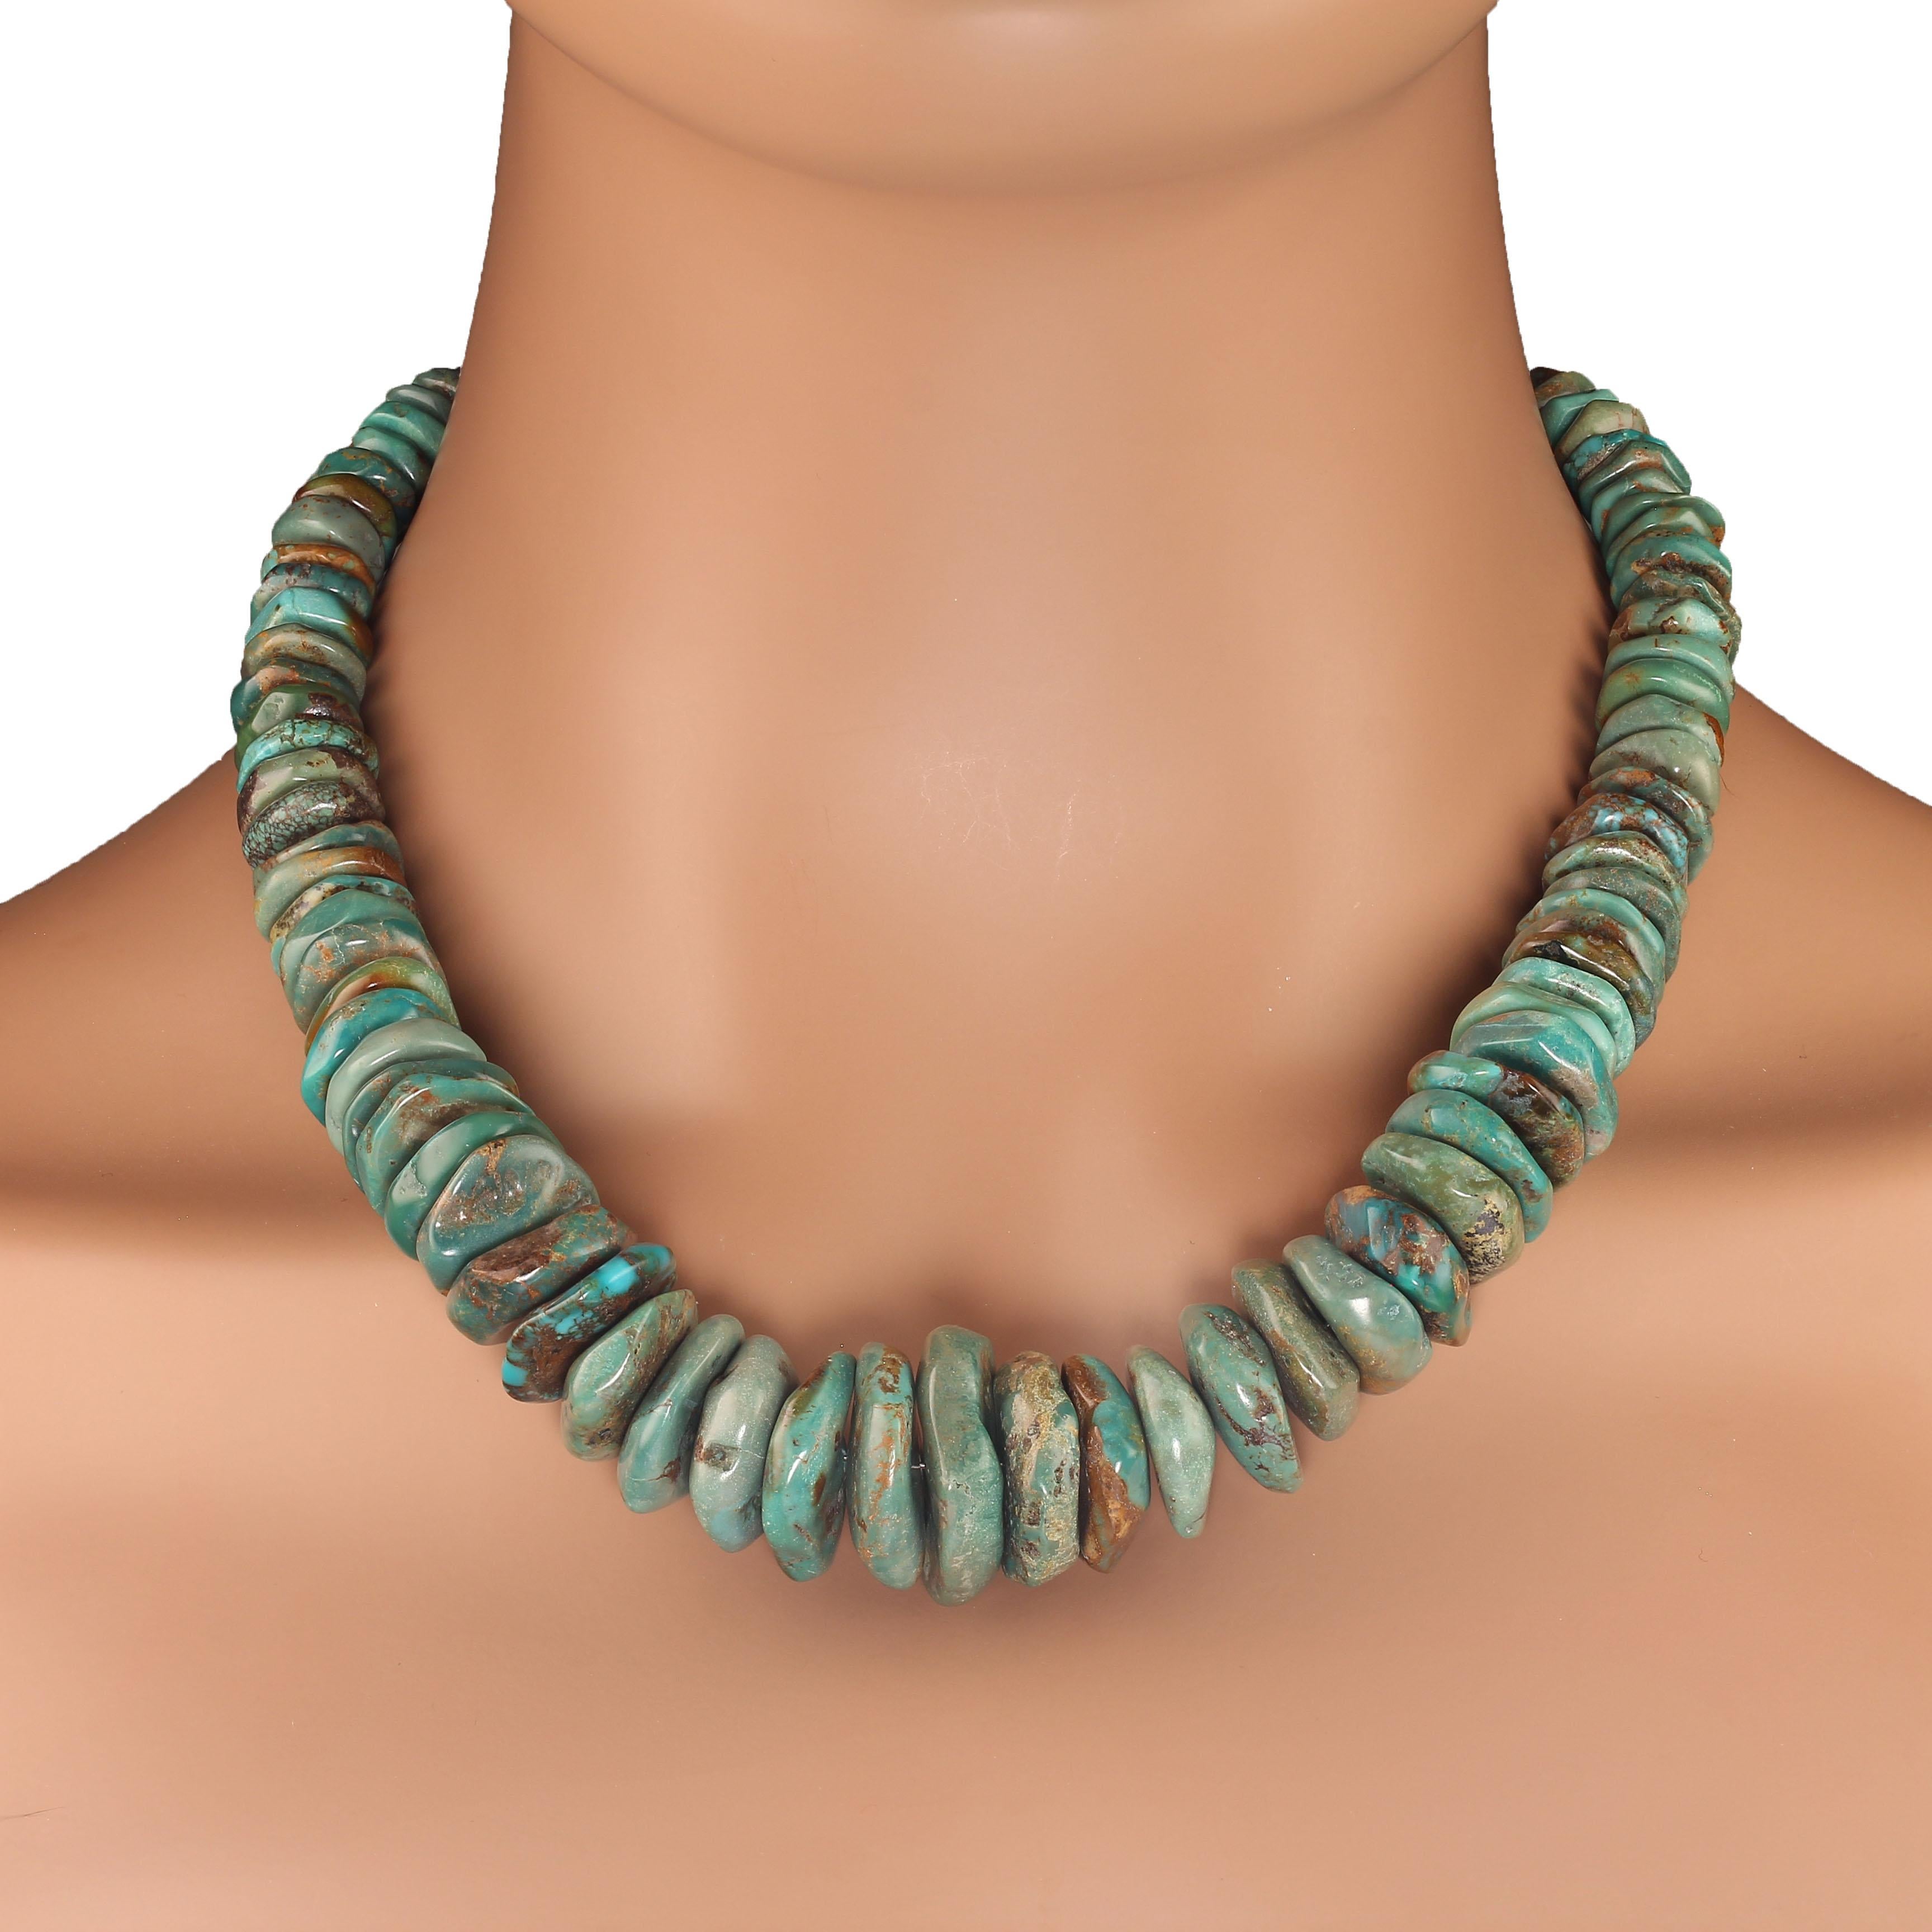 20 Inch graduated green chinese turquoise necklace.  This elegant necklace graduates in size 8-22mm. The slices are rough and mottled which creates its charm. It is secured with a 2-ring silver plate toggle clasp.  MN2389